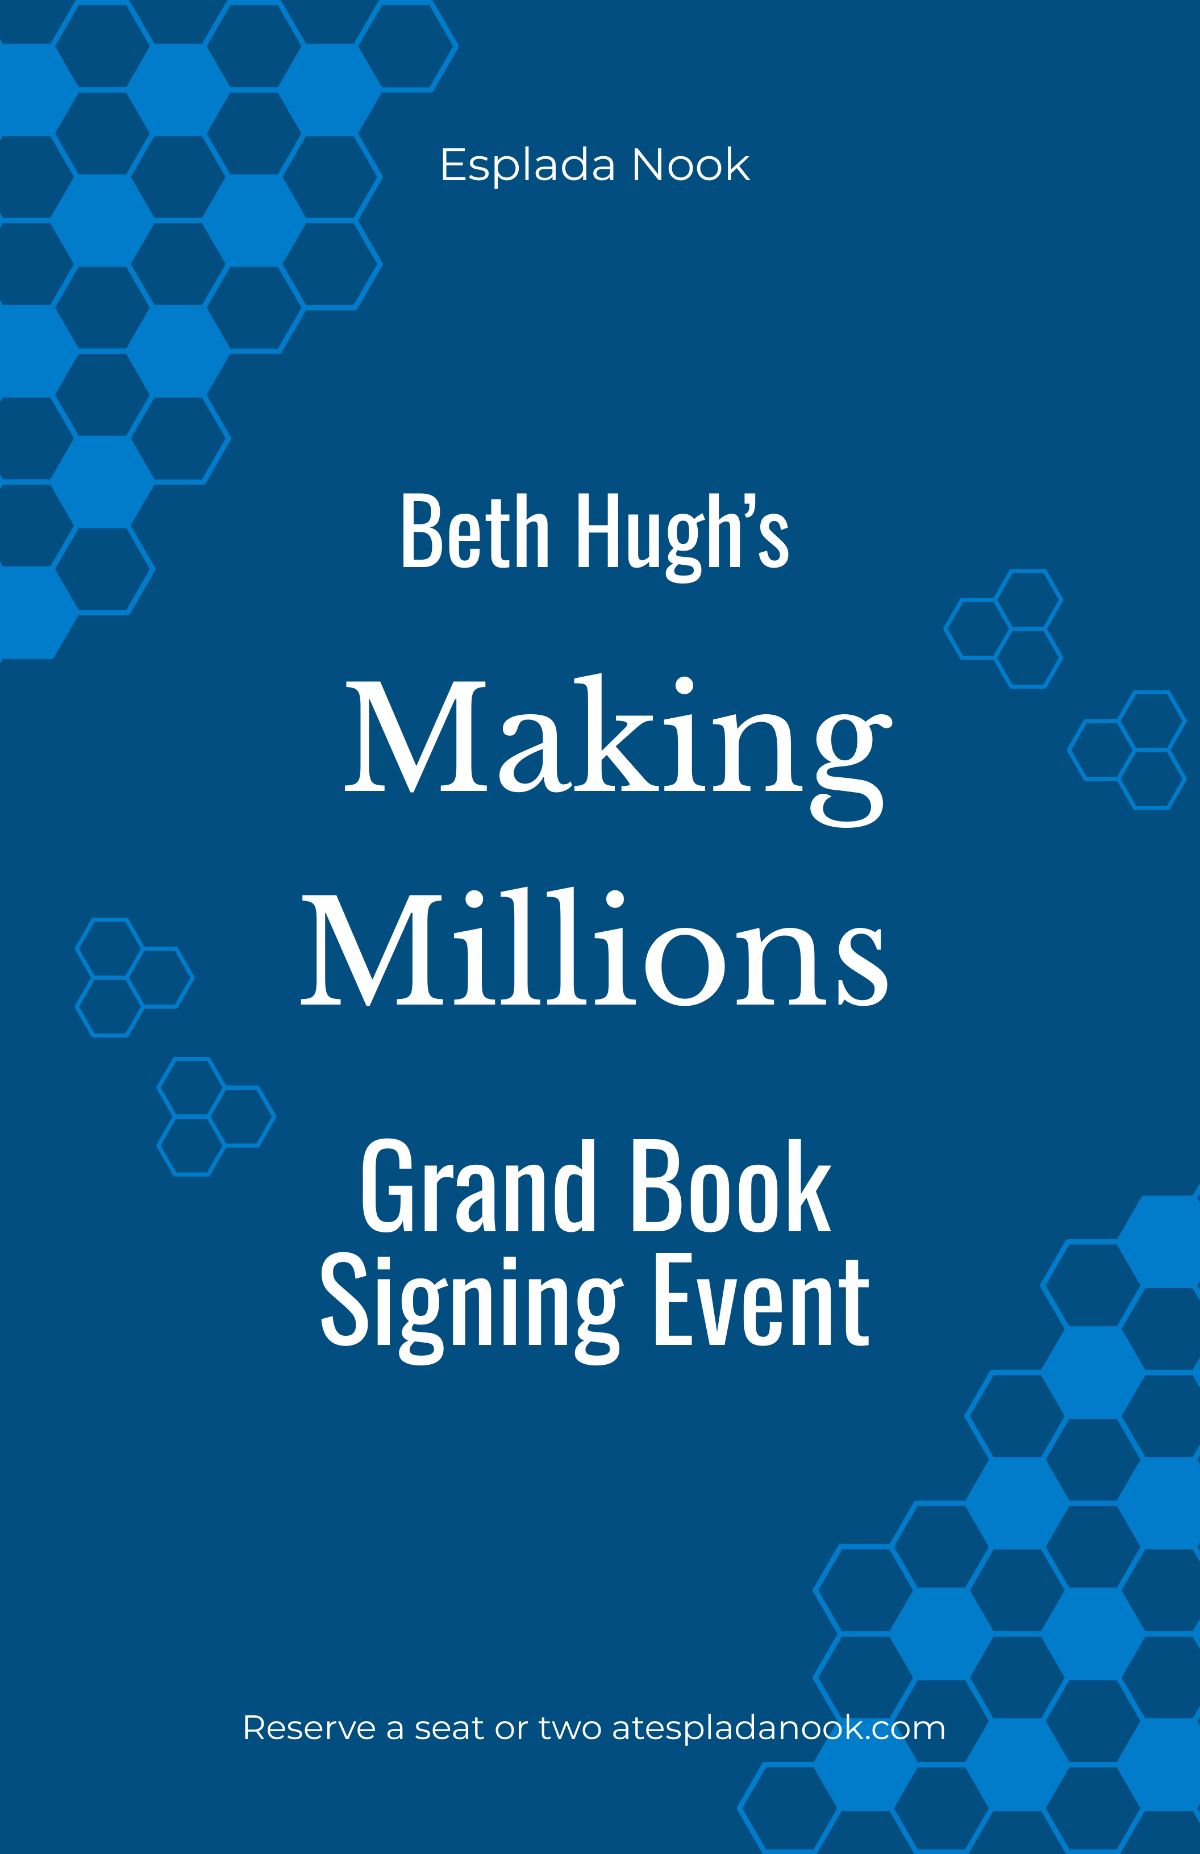 Book Signing Advertisement Poster Template